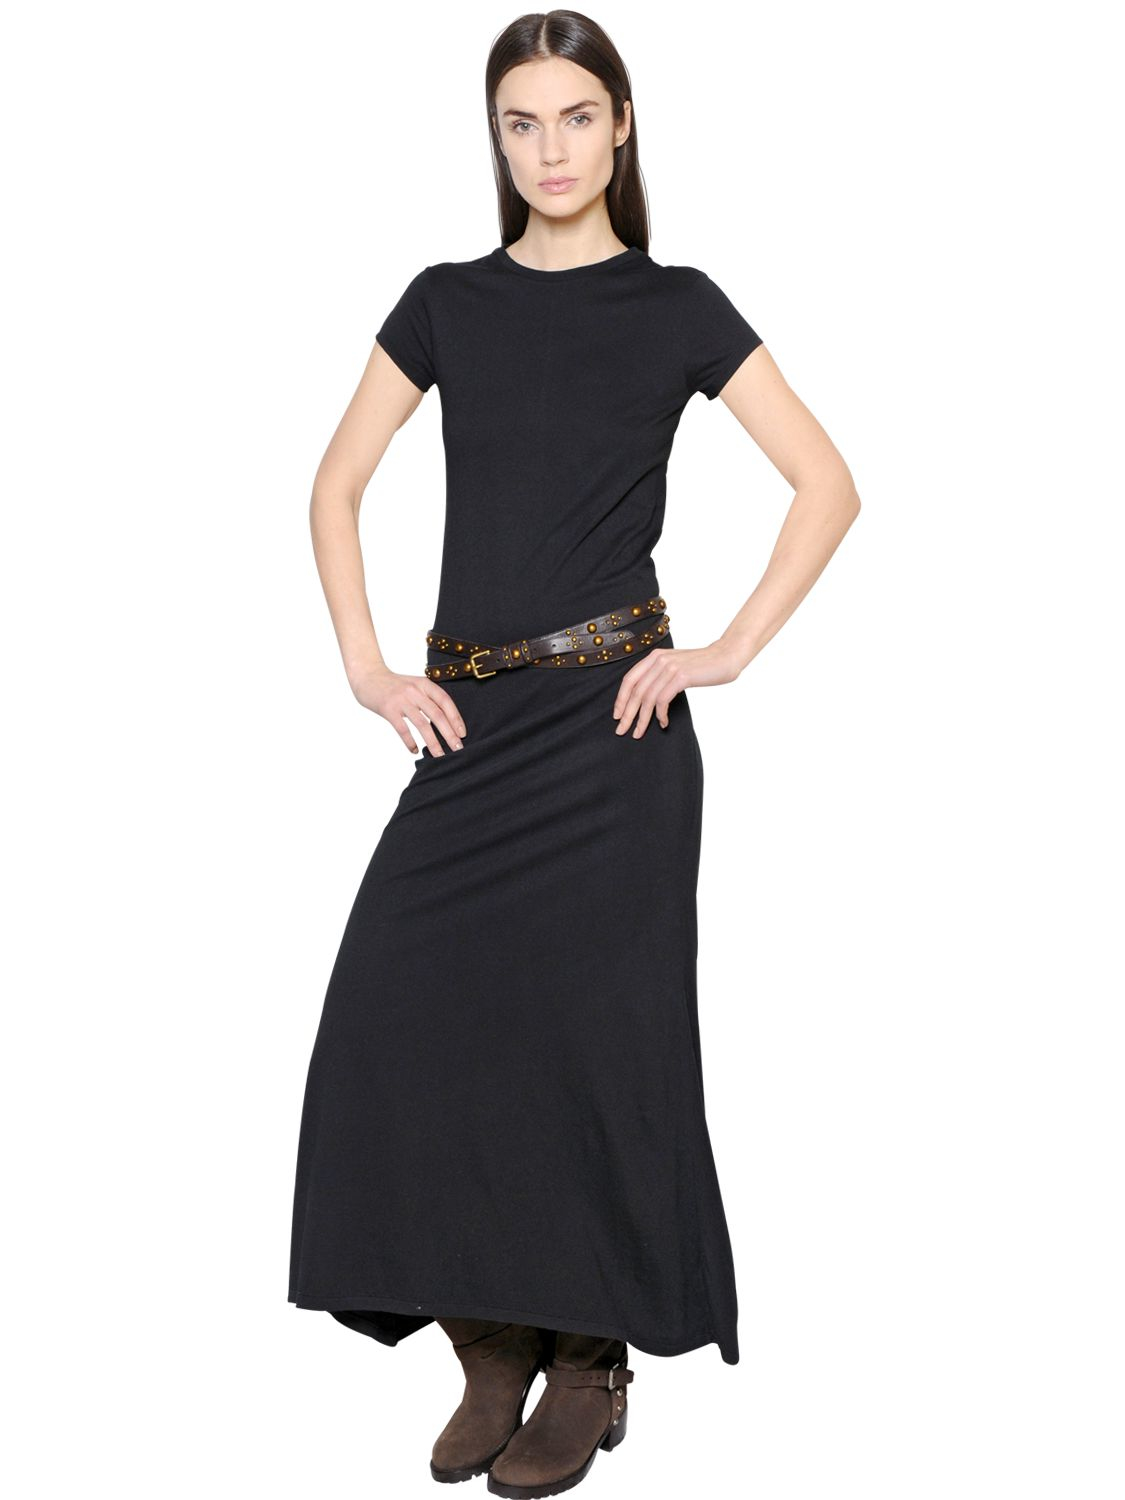 You won't Believe This.. 29+ Reasons for Black Cotton Maxi Dress! Style ...